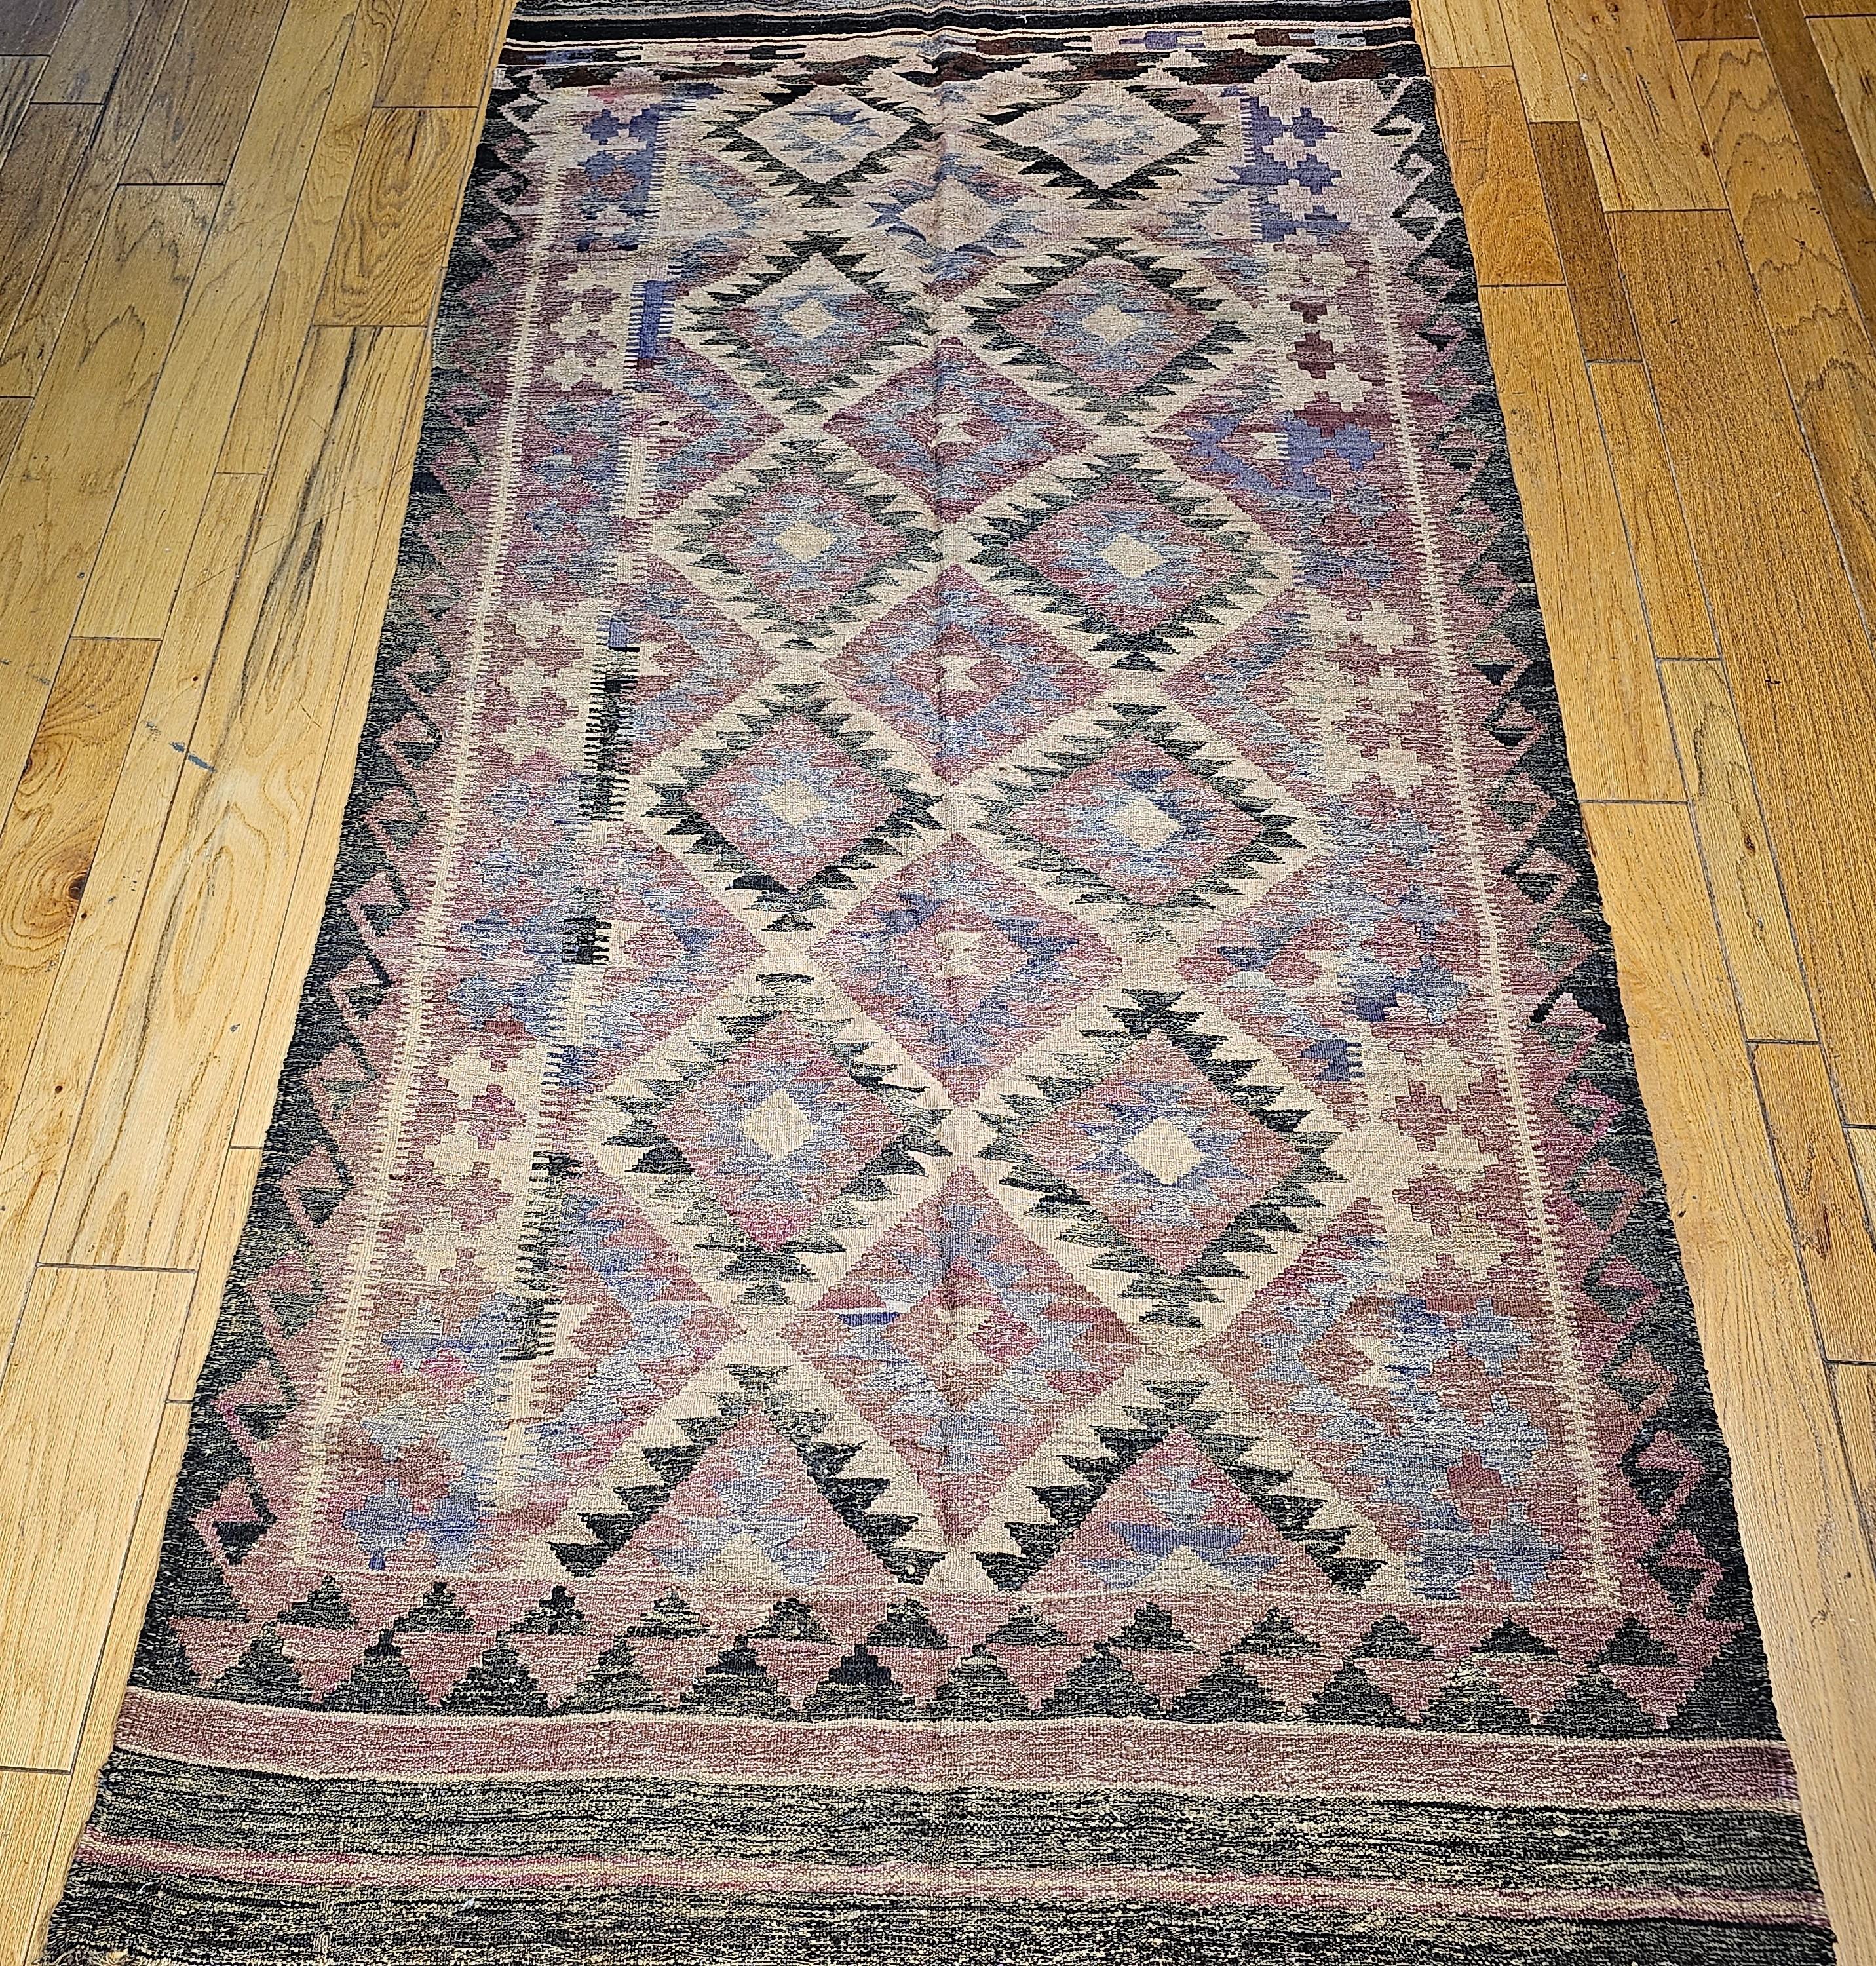  Vintage Turkish Kilim in geometric pattern  in beautiful soft earth tone colors.  The colors in this Turkish Kilim include abrash (variations caused by the use of natural dyes) lavender, cream, gray, black, beige, brown, and pale brick red